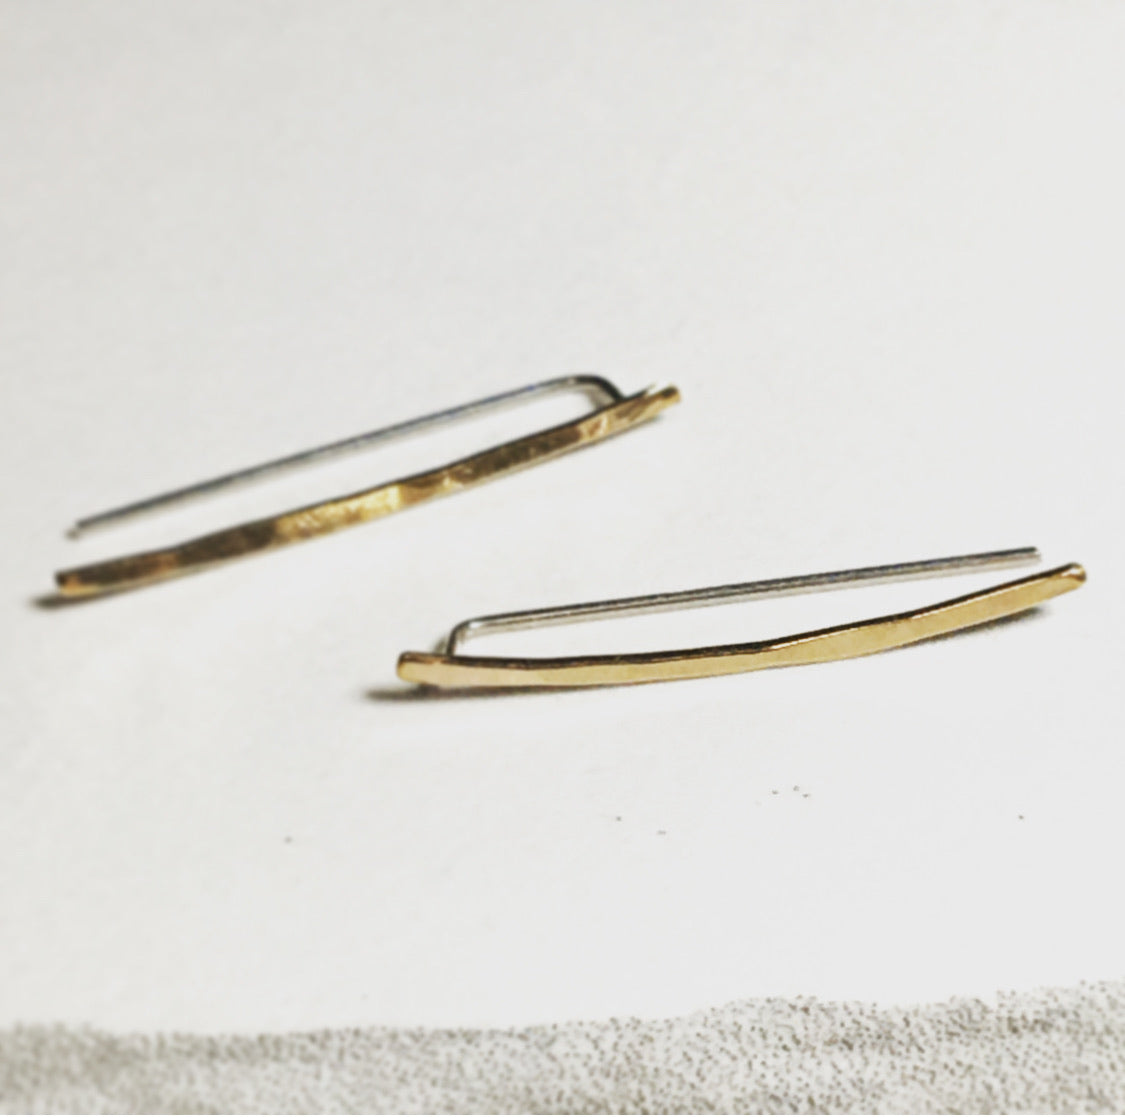 Hammered Ear Climber - Sterling Silver, Gold Fill or Rose Gold Fill